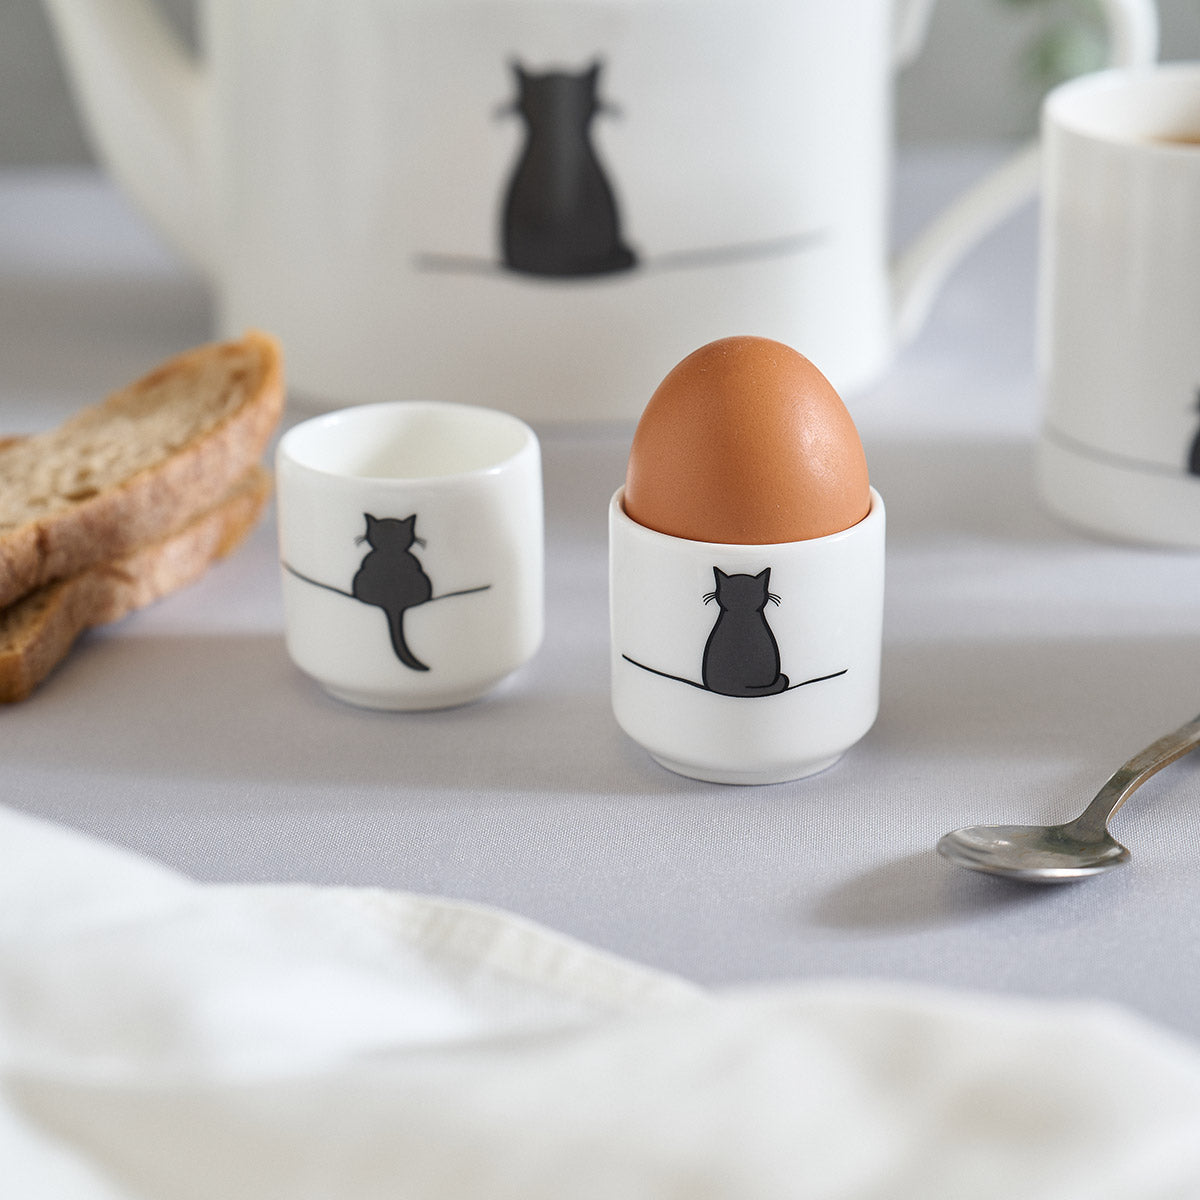 Egg Cups with Cat Collection Tea Pot